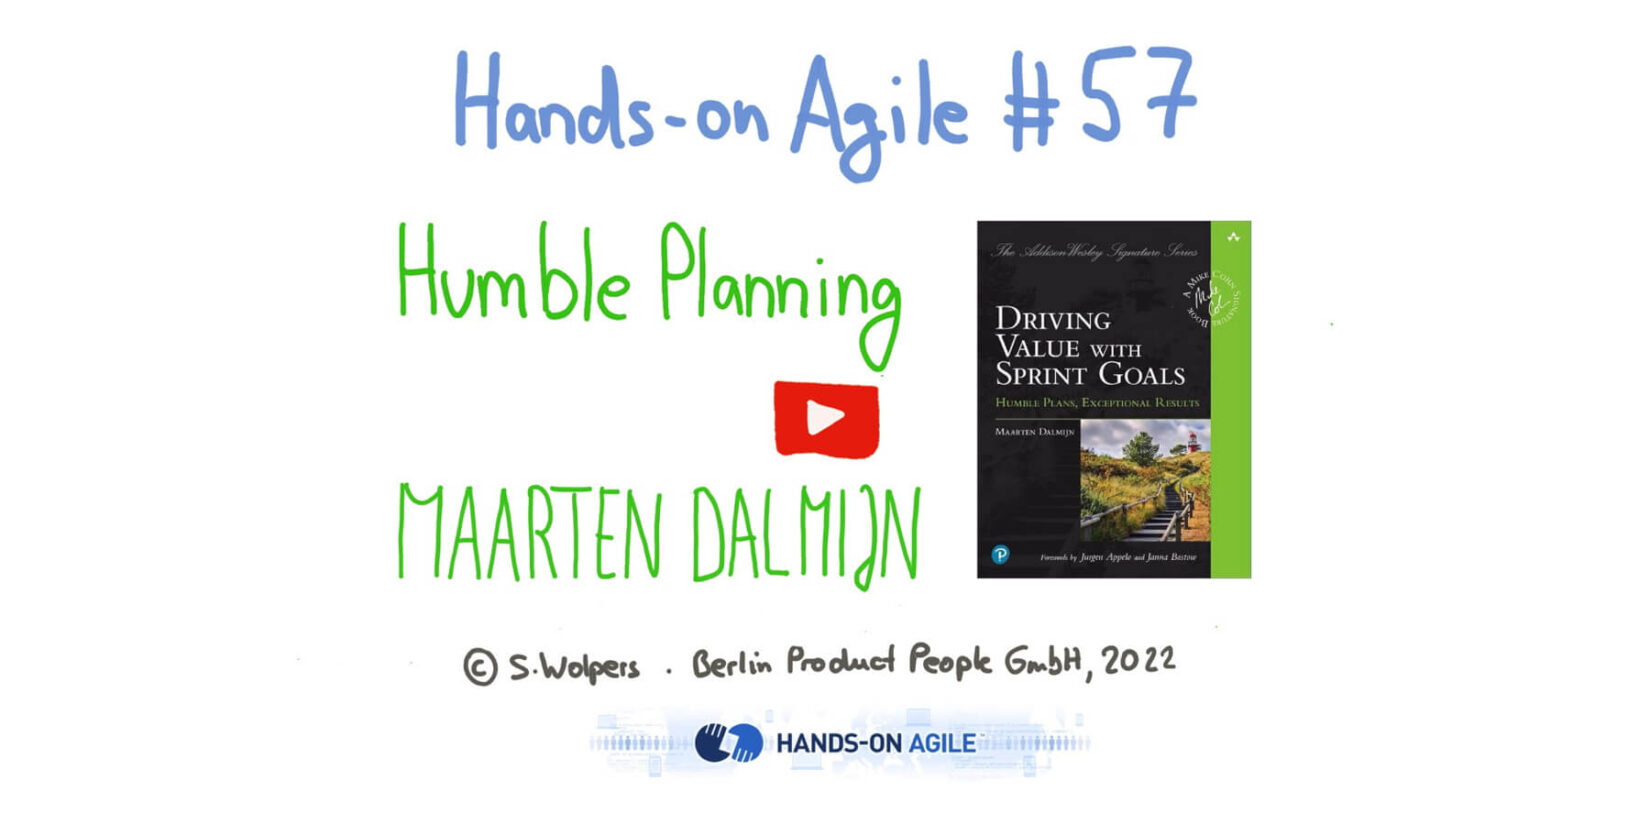 Humble Planning: How To Make Your Plans Suck Less with Maarten Dalmijn at the 57. Hands-on Agile Meetup — Age-of-Product.com